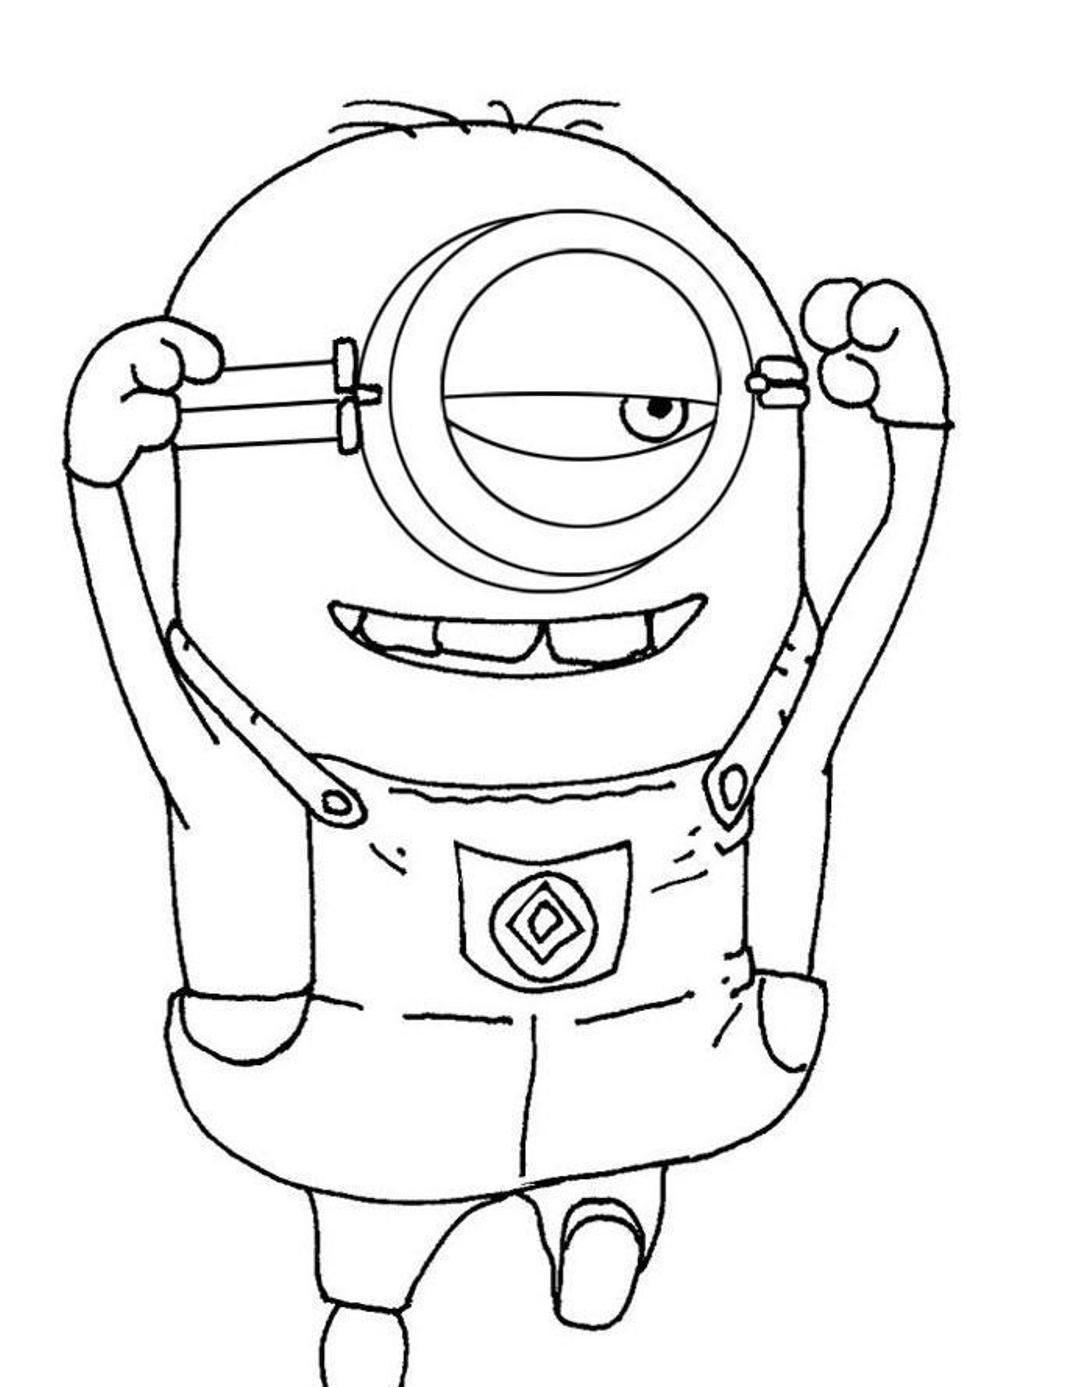 Despicable Me Coloring Pages Minion For Kids Free | Cartoon ...